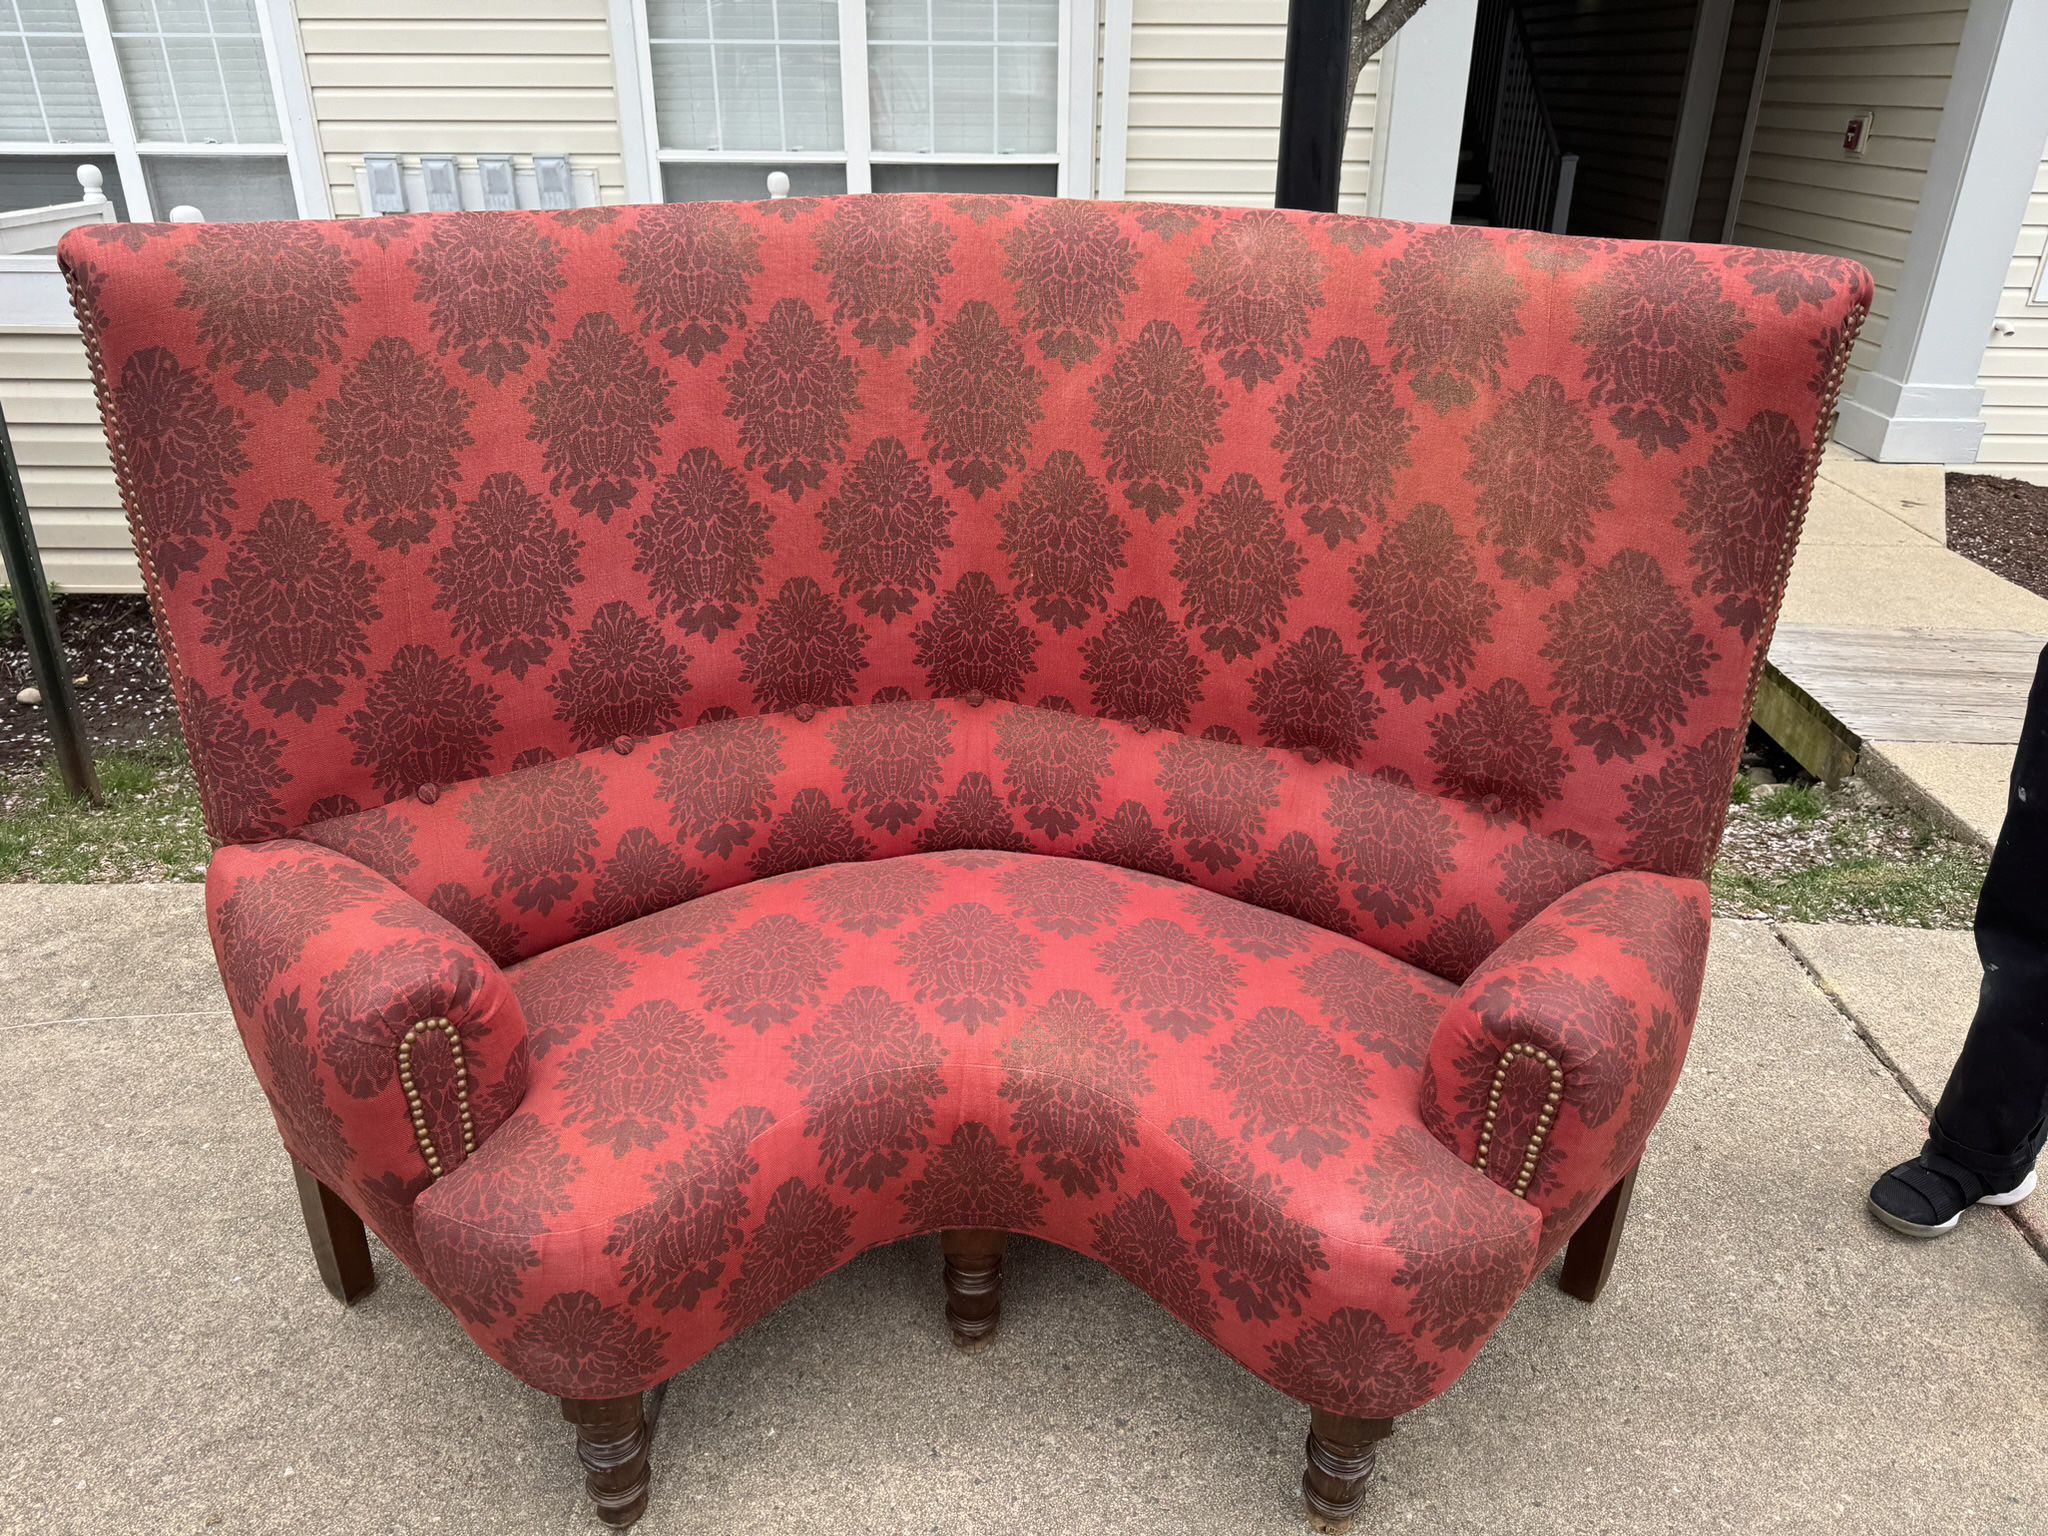 Loveseat (local Delivery)